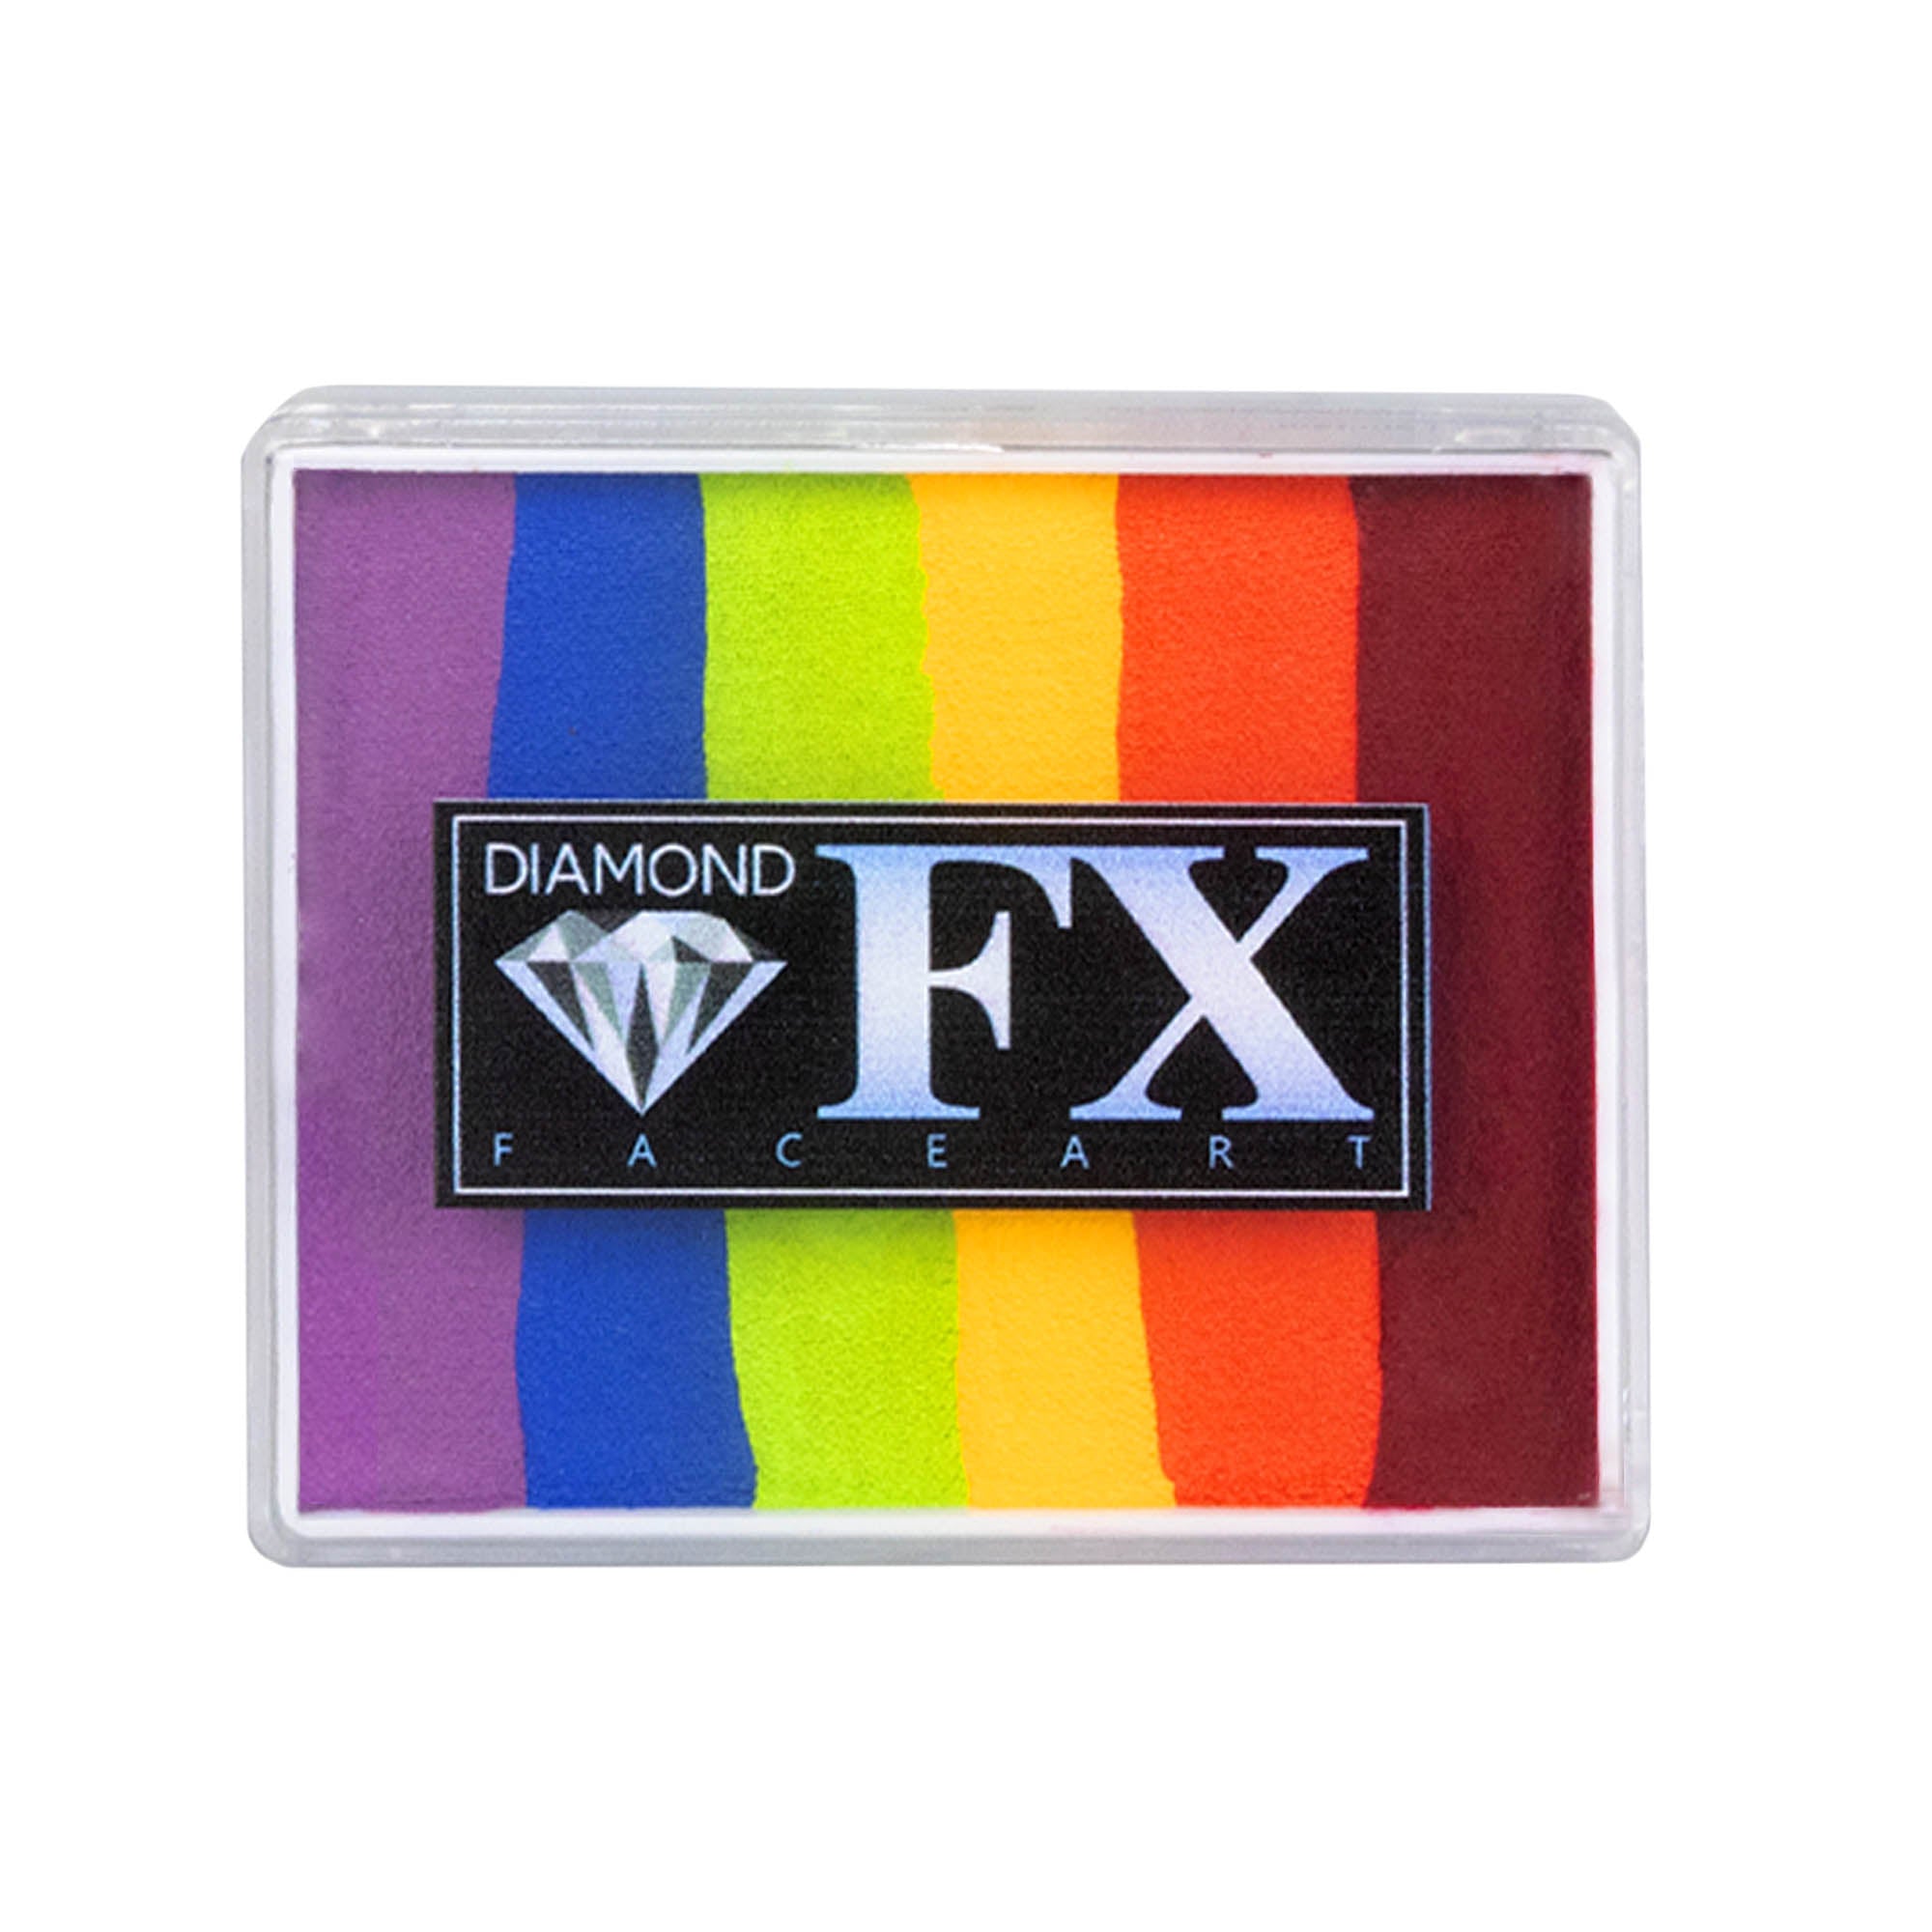 Diamond FX 50G split cake facepaints Flabbergasted with lid on in a white background